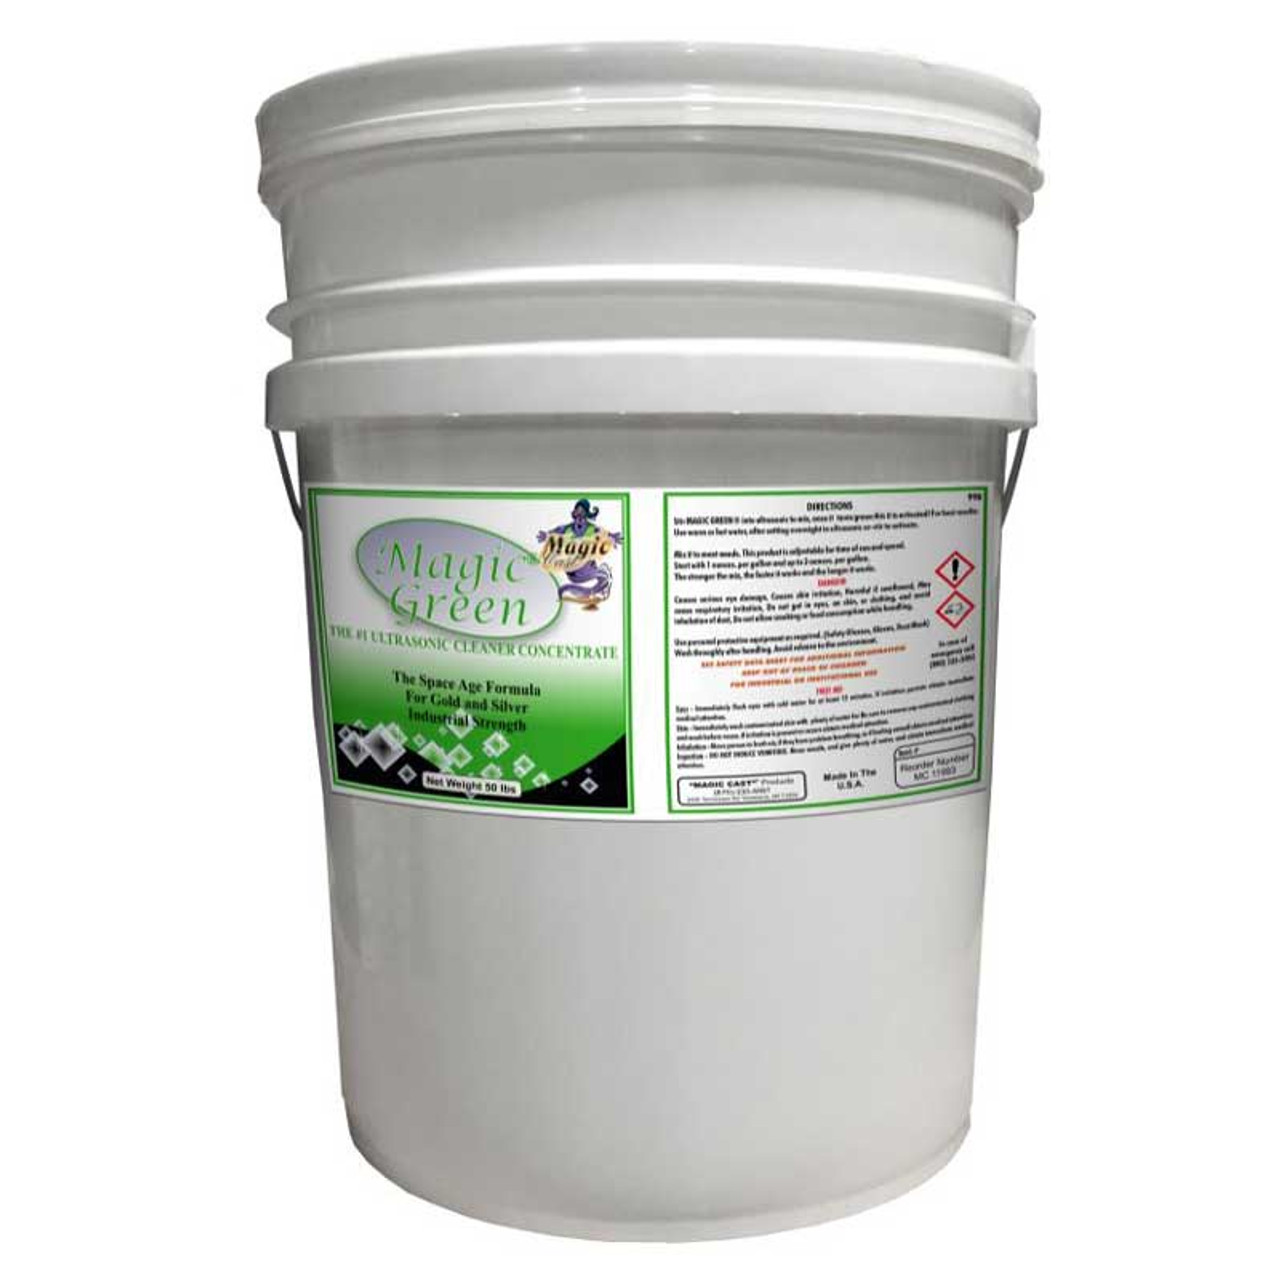 Magic Green Ultrasonic Cleaning Solution Concentrate 2 lbs